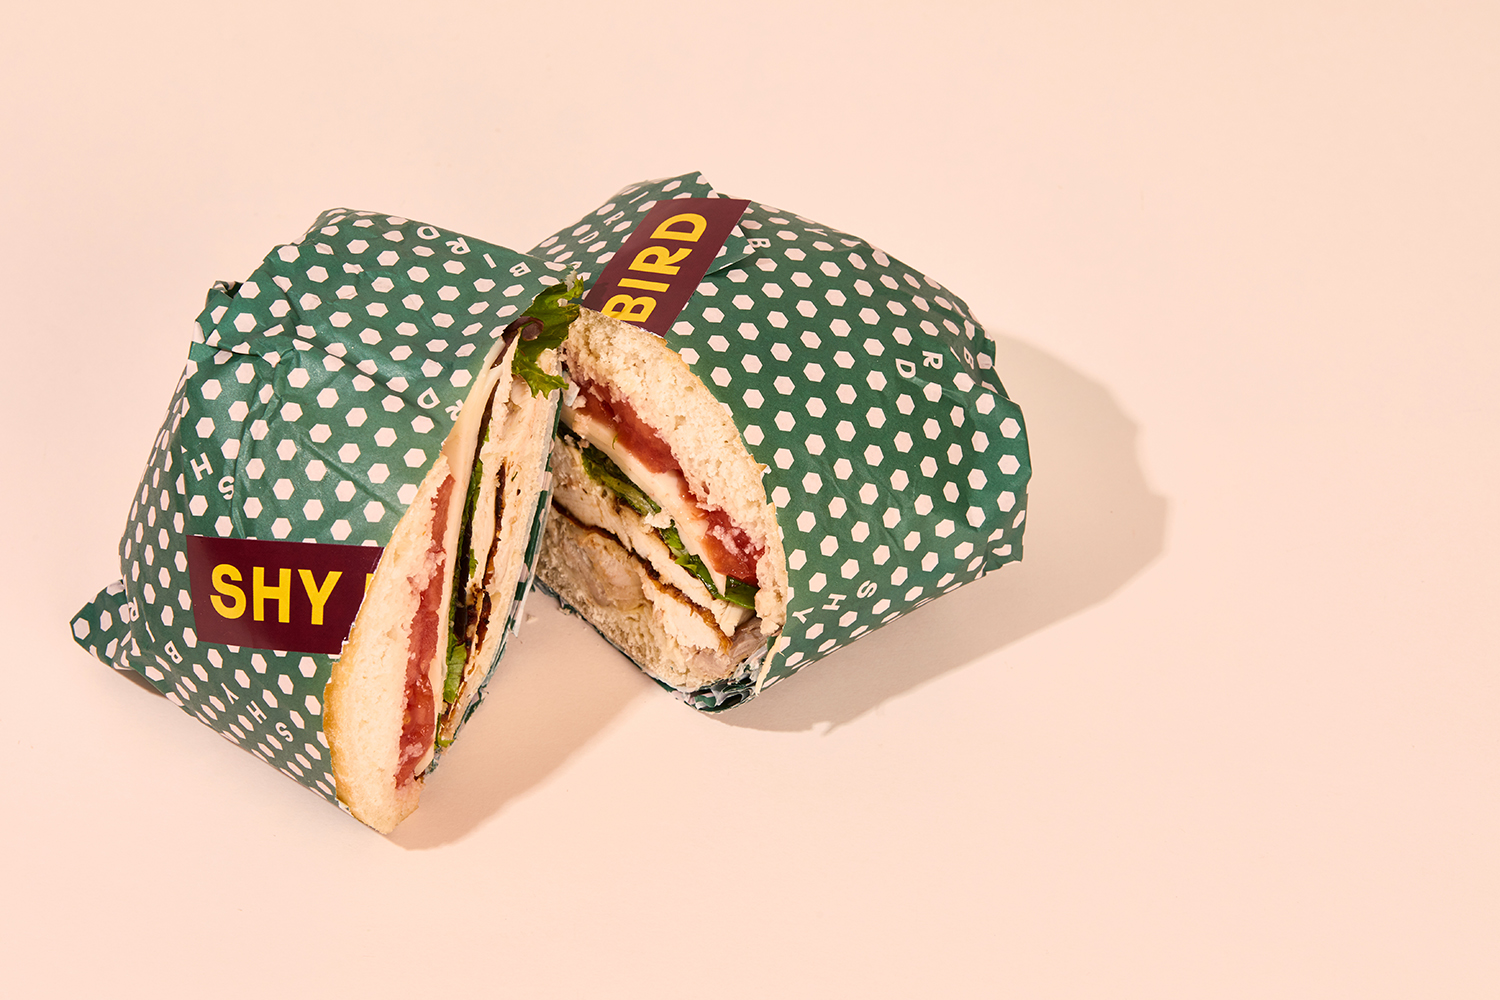 Logotype, pattern and sandwich wrap by Perky Bros for Shy Bird, a café, rotisserie and bar in Cambridge, MA